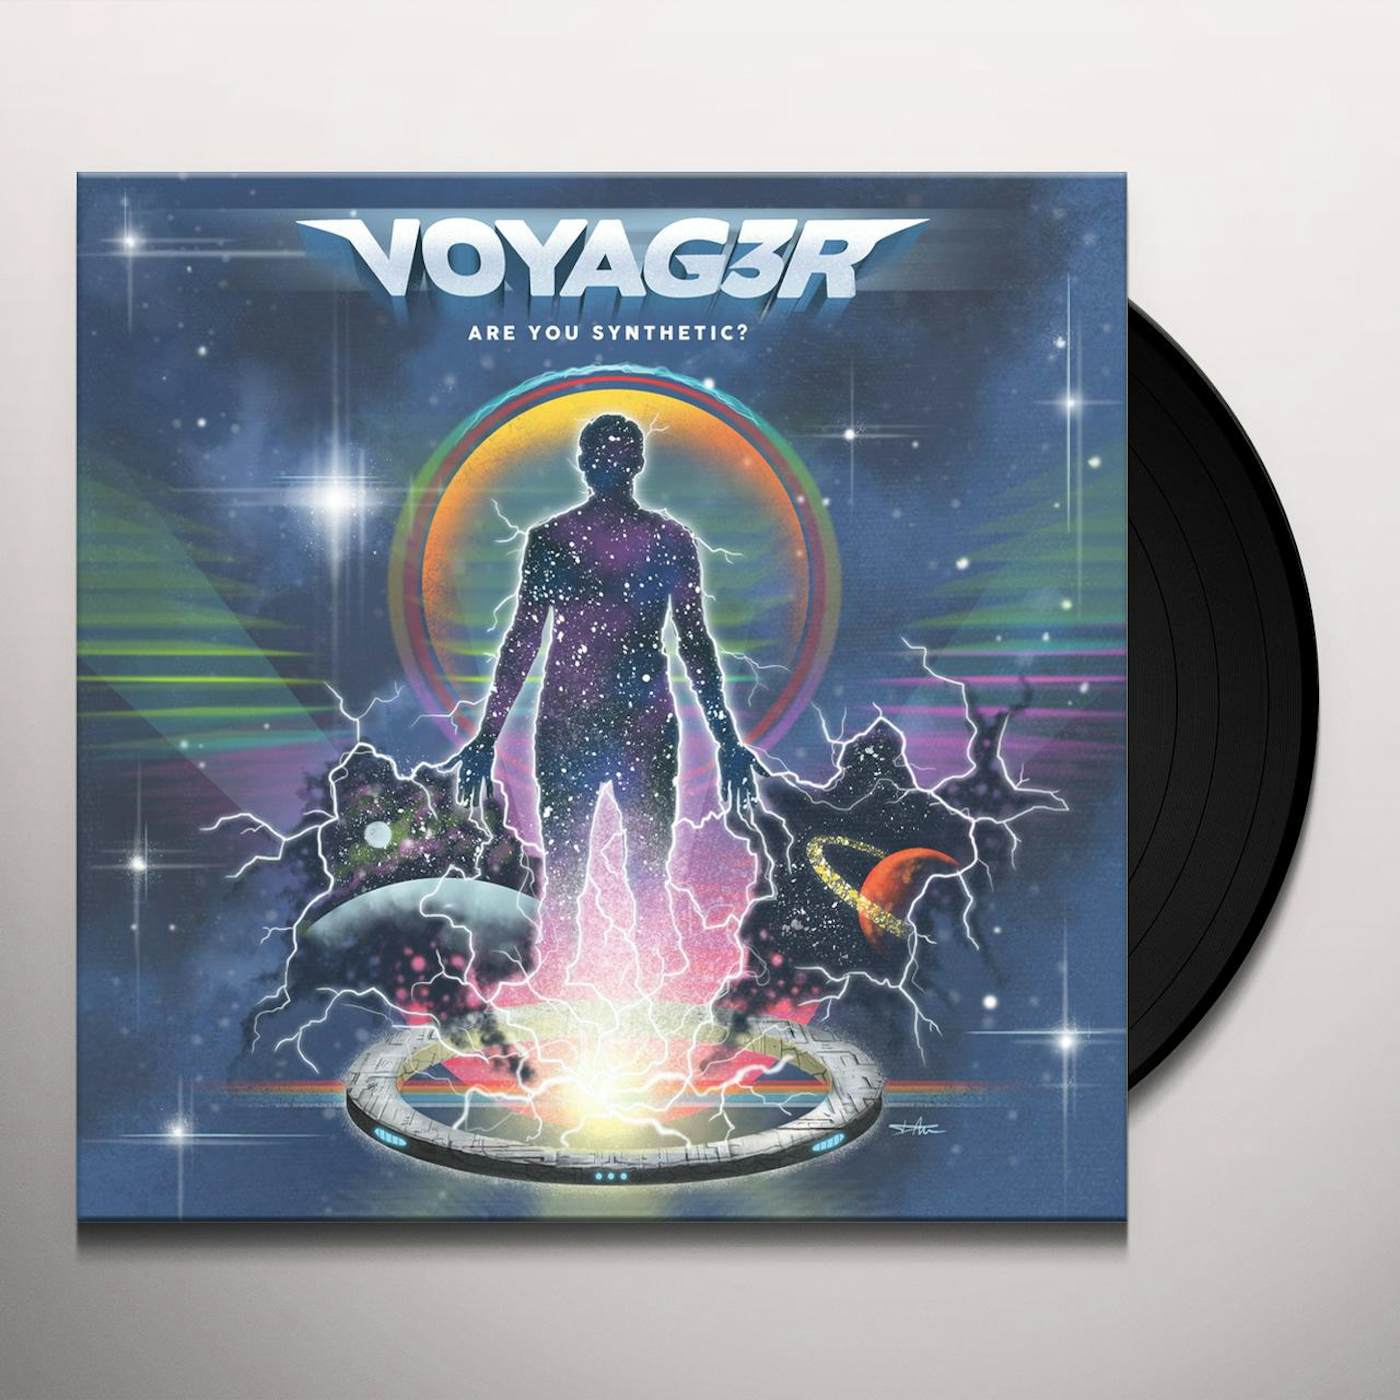 Voyag3r Are You Synthetic? Vinyl Record